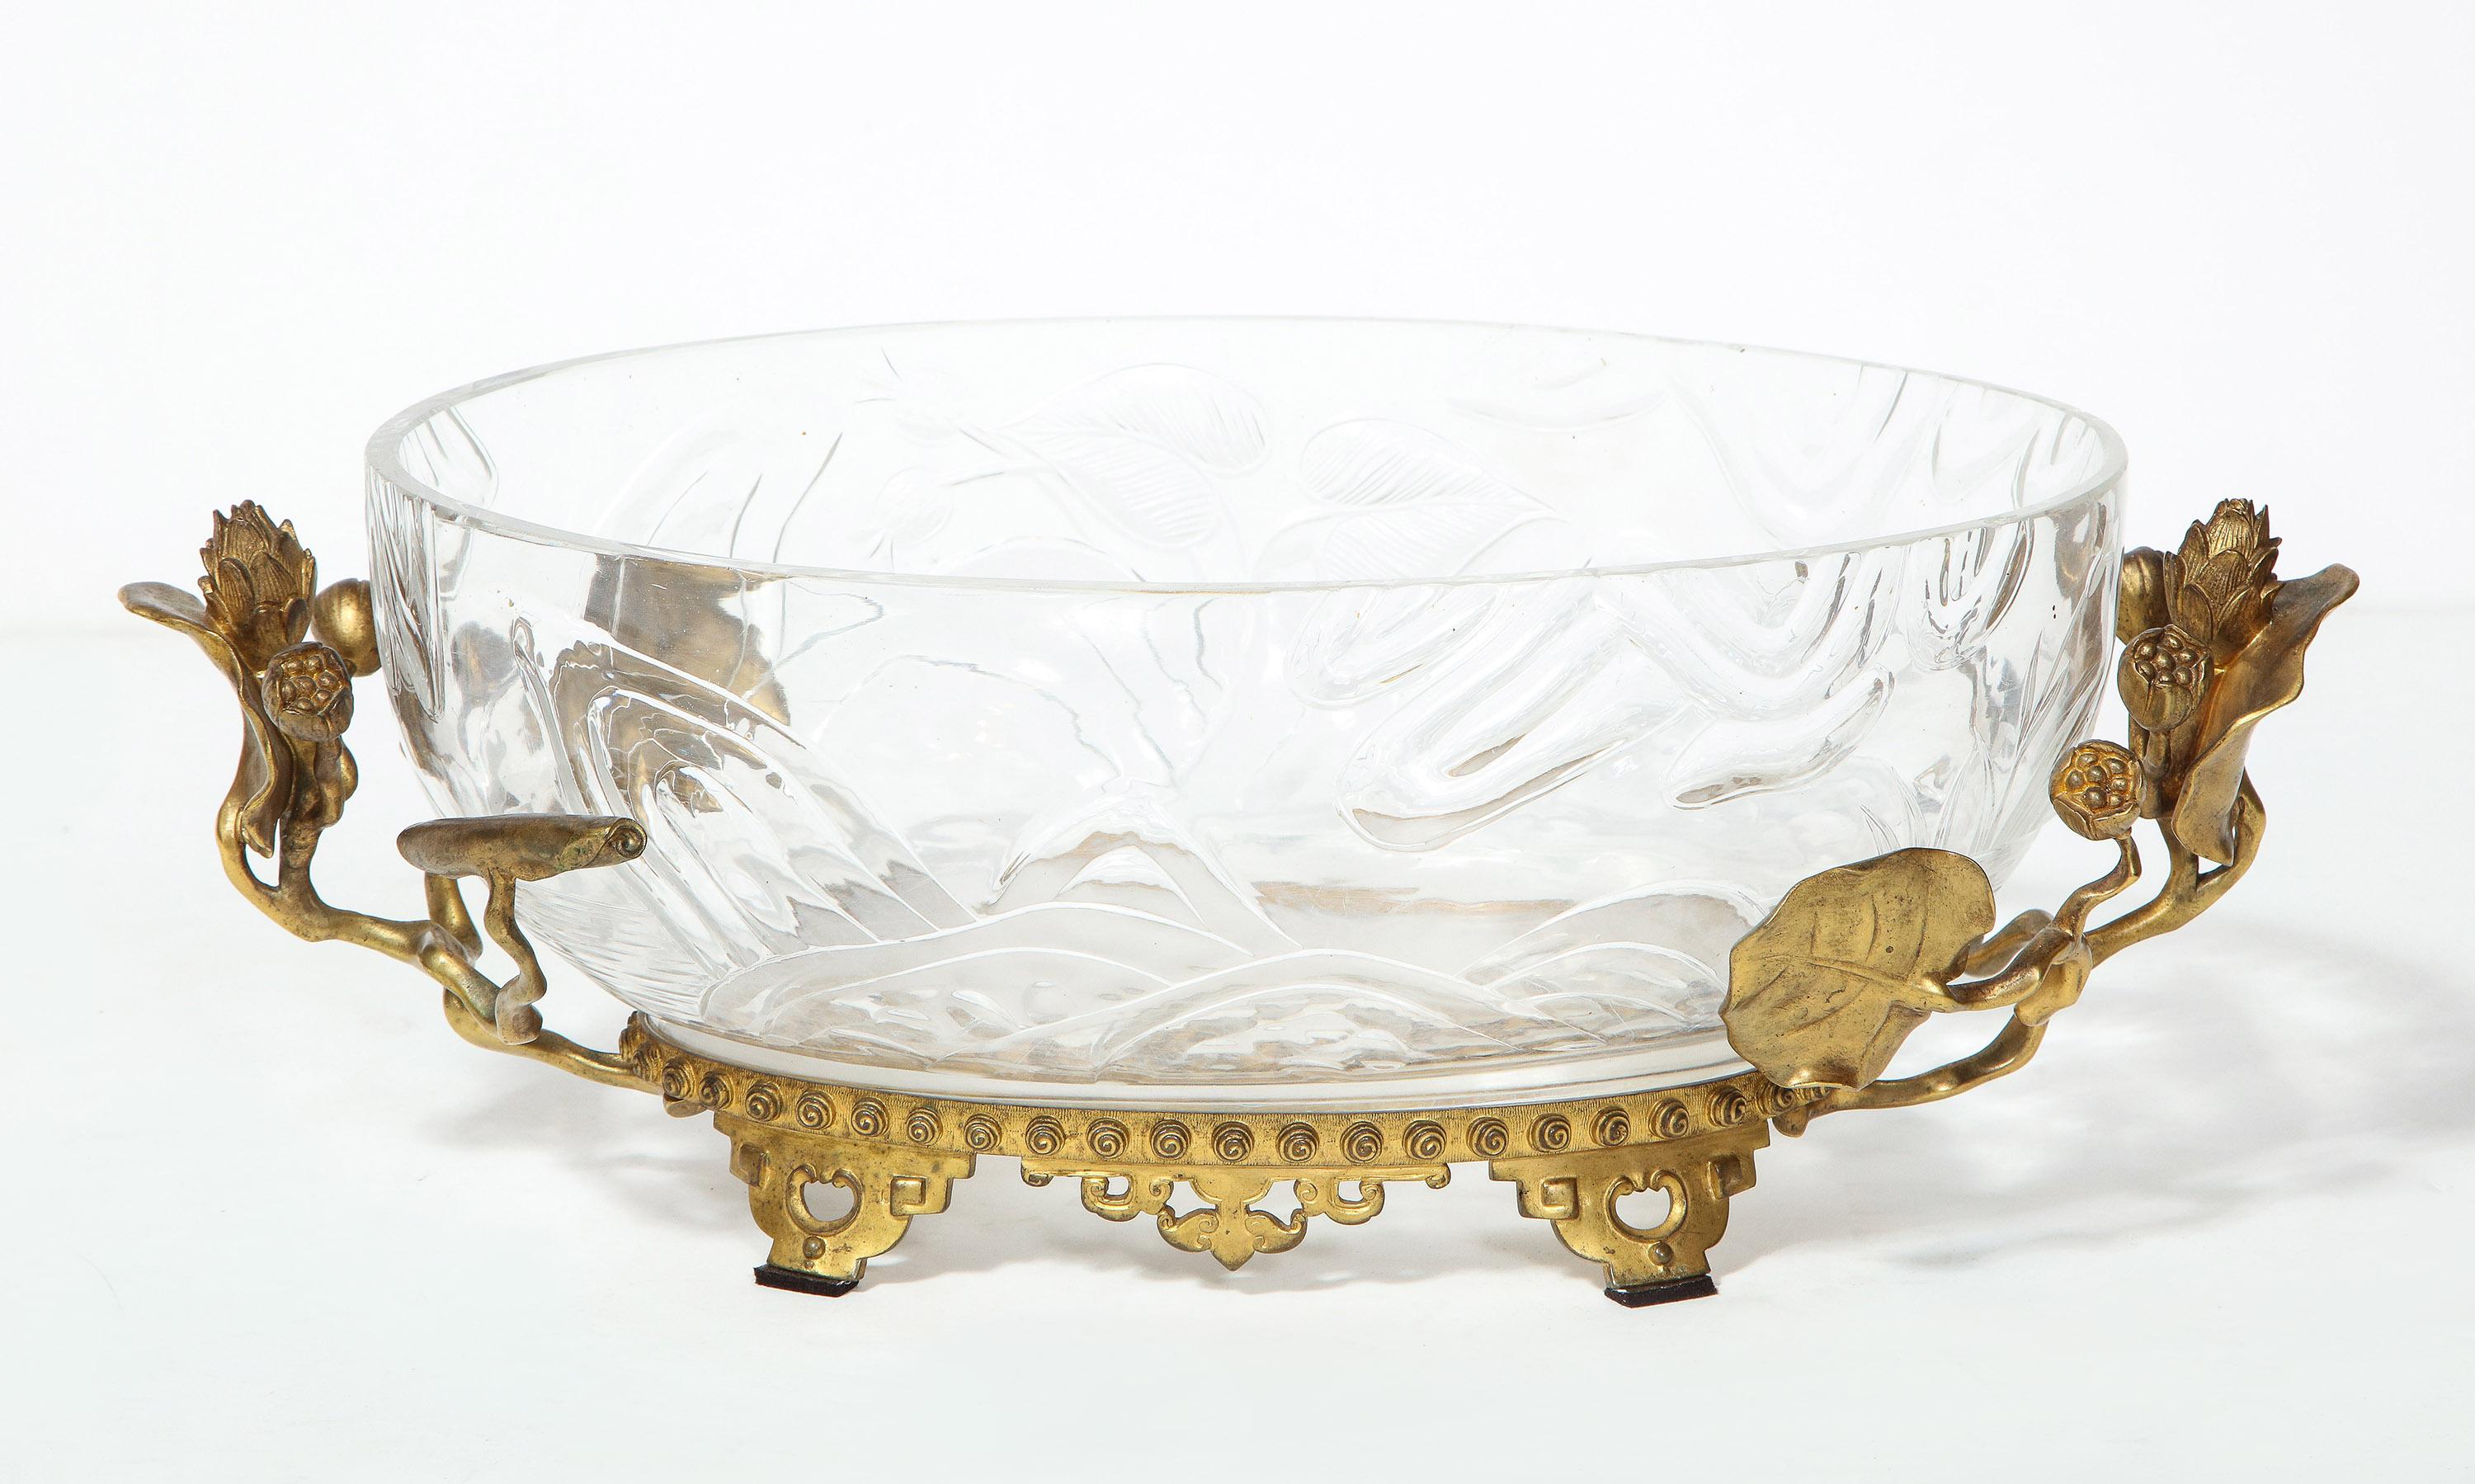 Art Nouveau bronze mounted crystal bowl

The crystal bowl with molded floral design, supported by a bronze frame of vines, all on an Asian design inspired base.